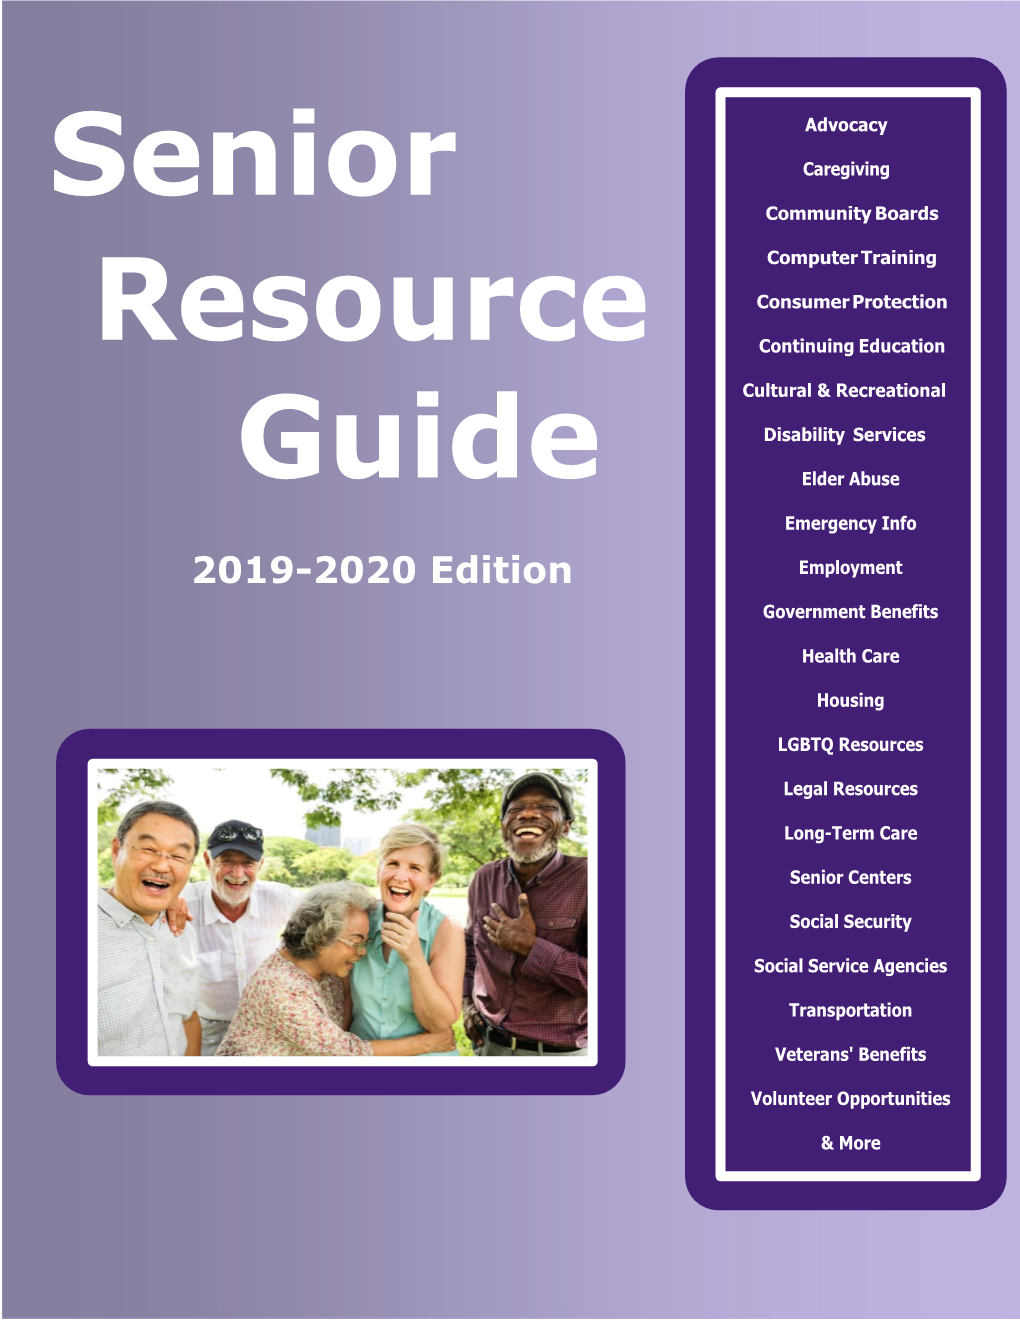 Senior Resource Guide - the Most Comprehensive Guide to Resources for Older Adults in Our Community